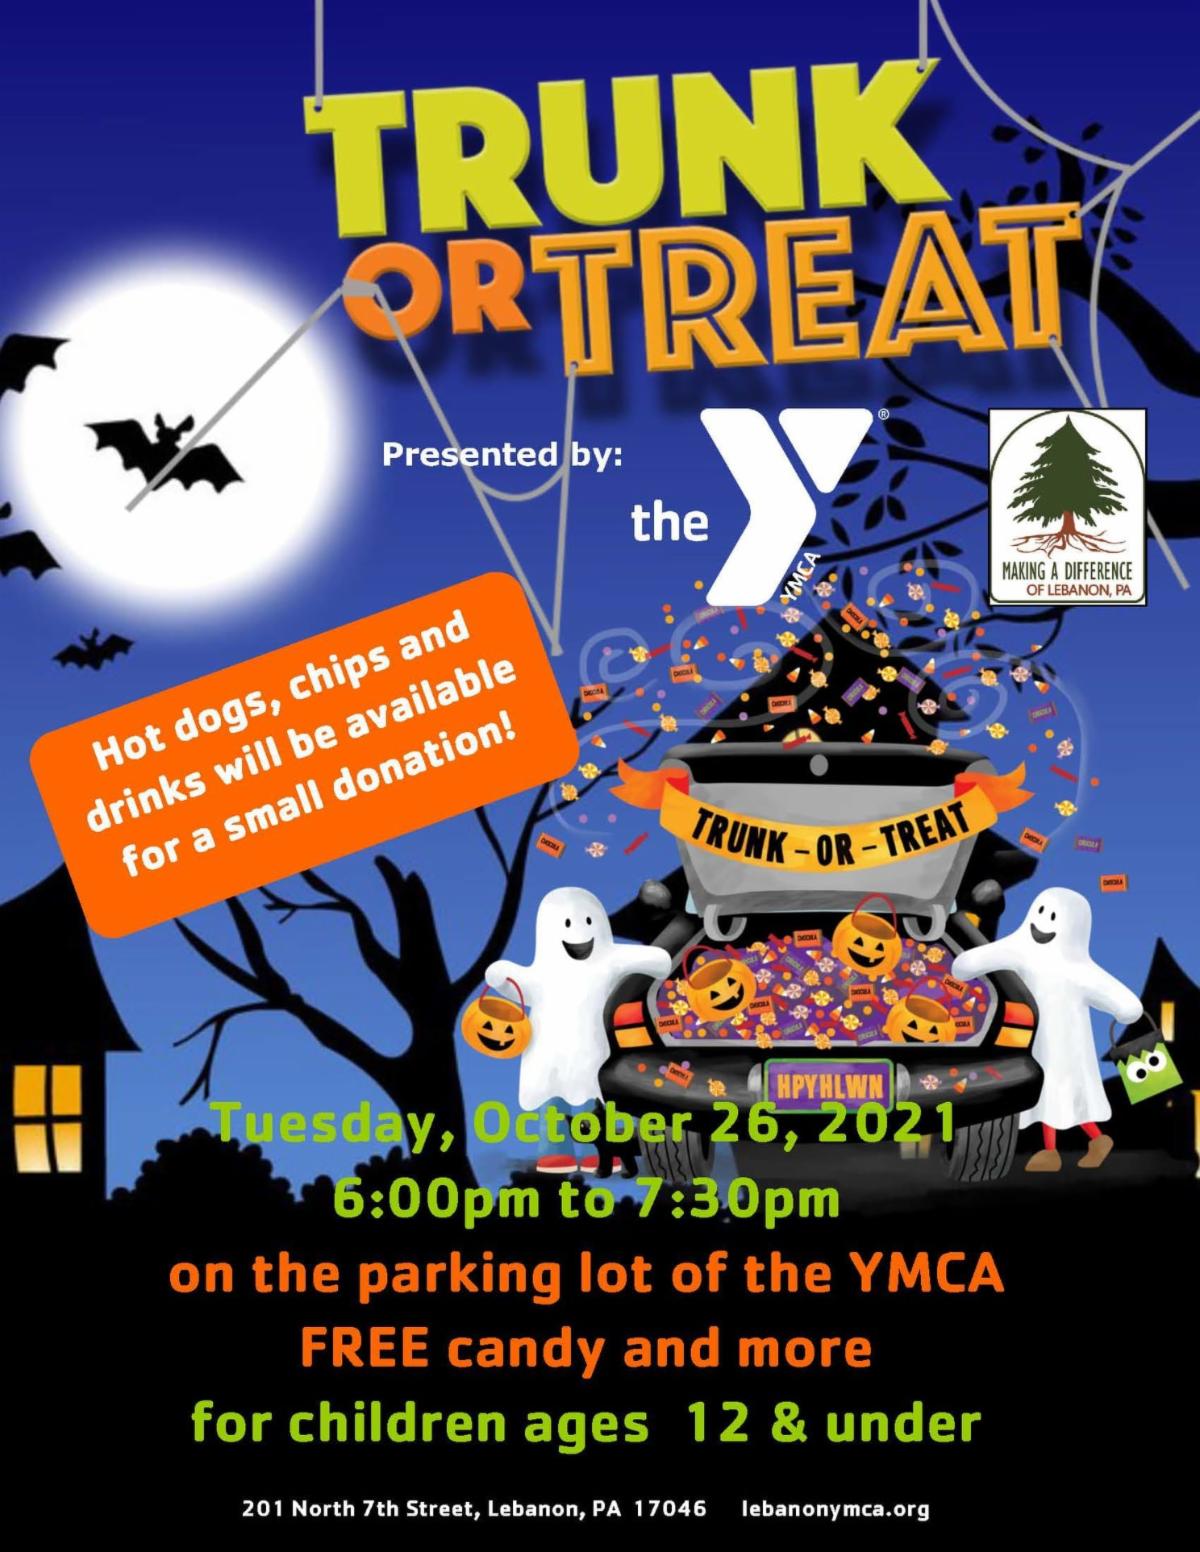 Trunk or Treat at the YMCA